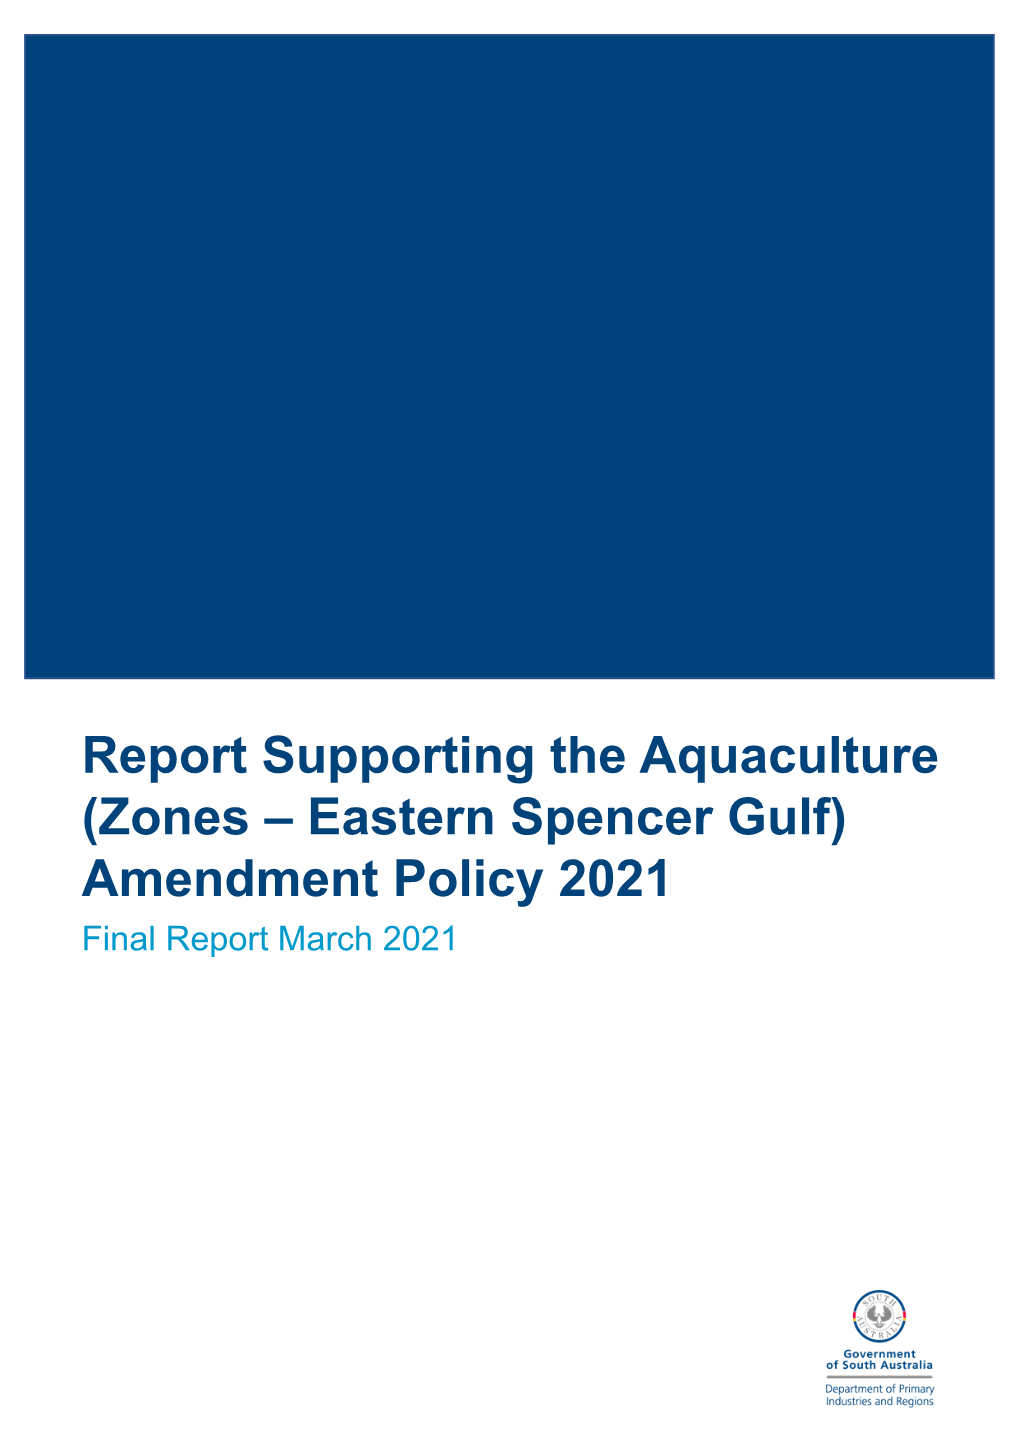 Report Supporting the Aquaculture (Zones – Eastern Spencer Gulf) Amendment Policy 2021 Final Report March 2021